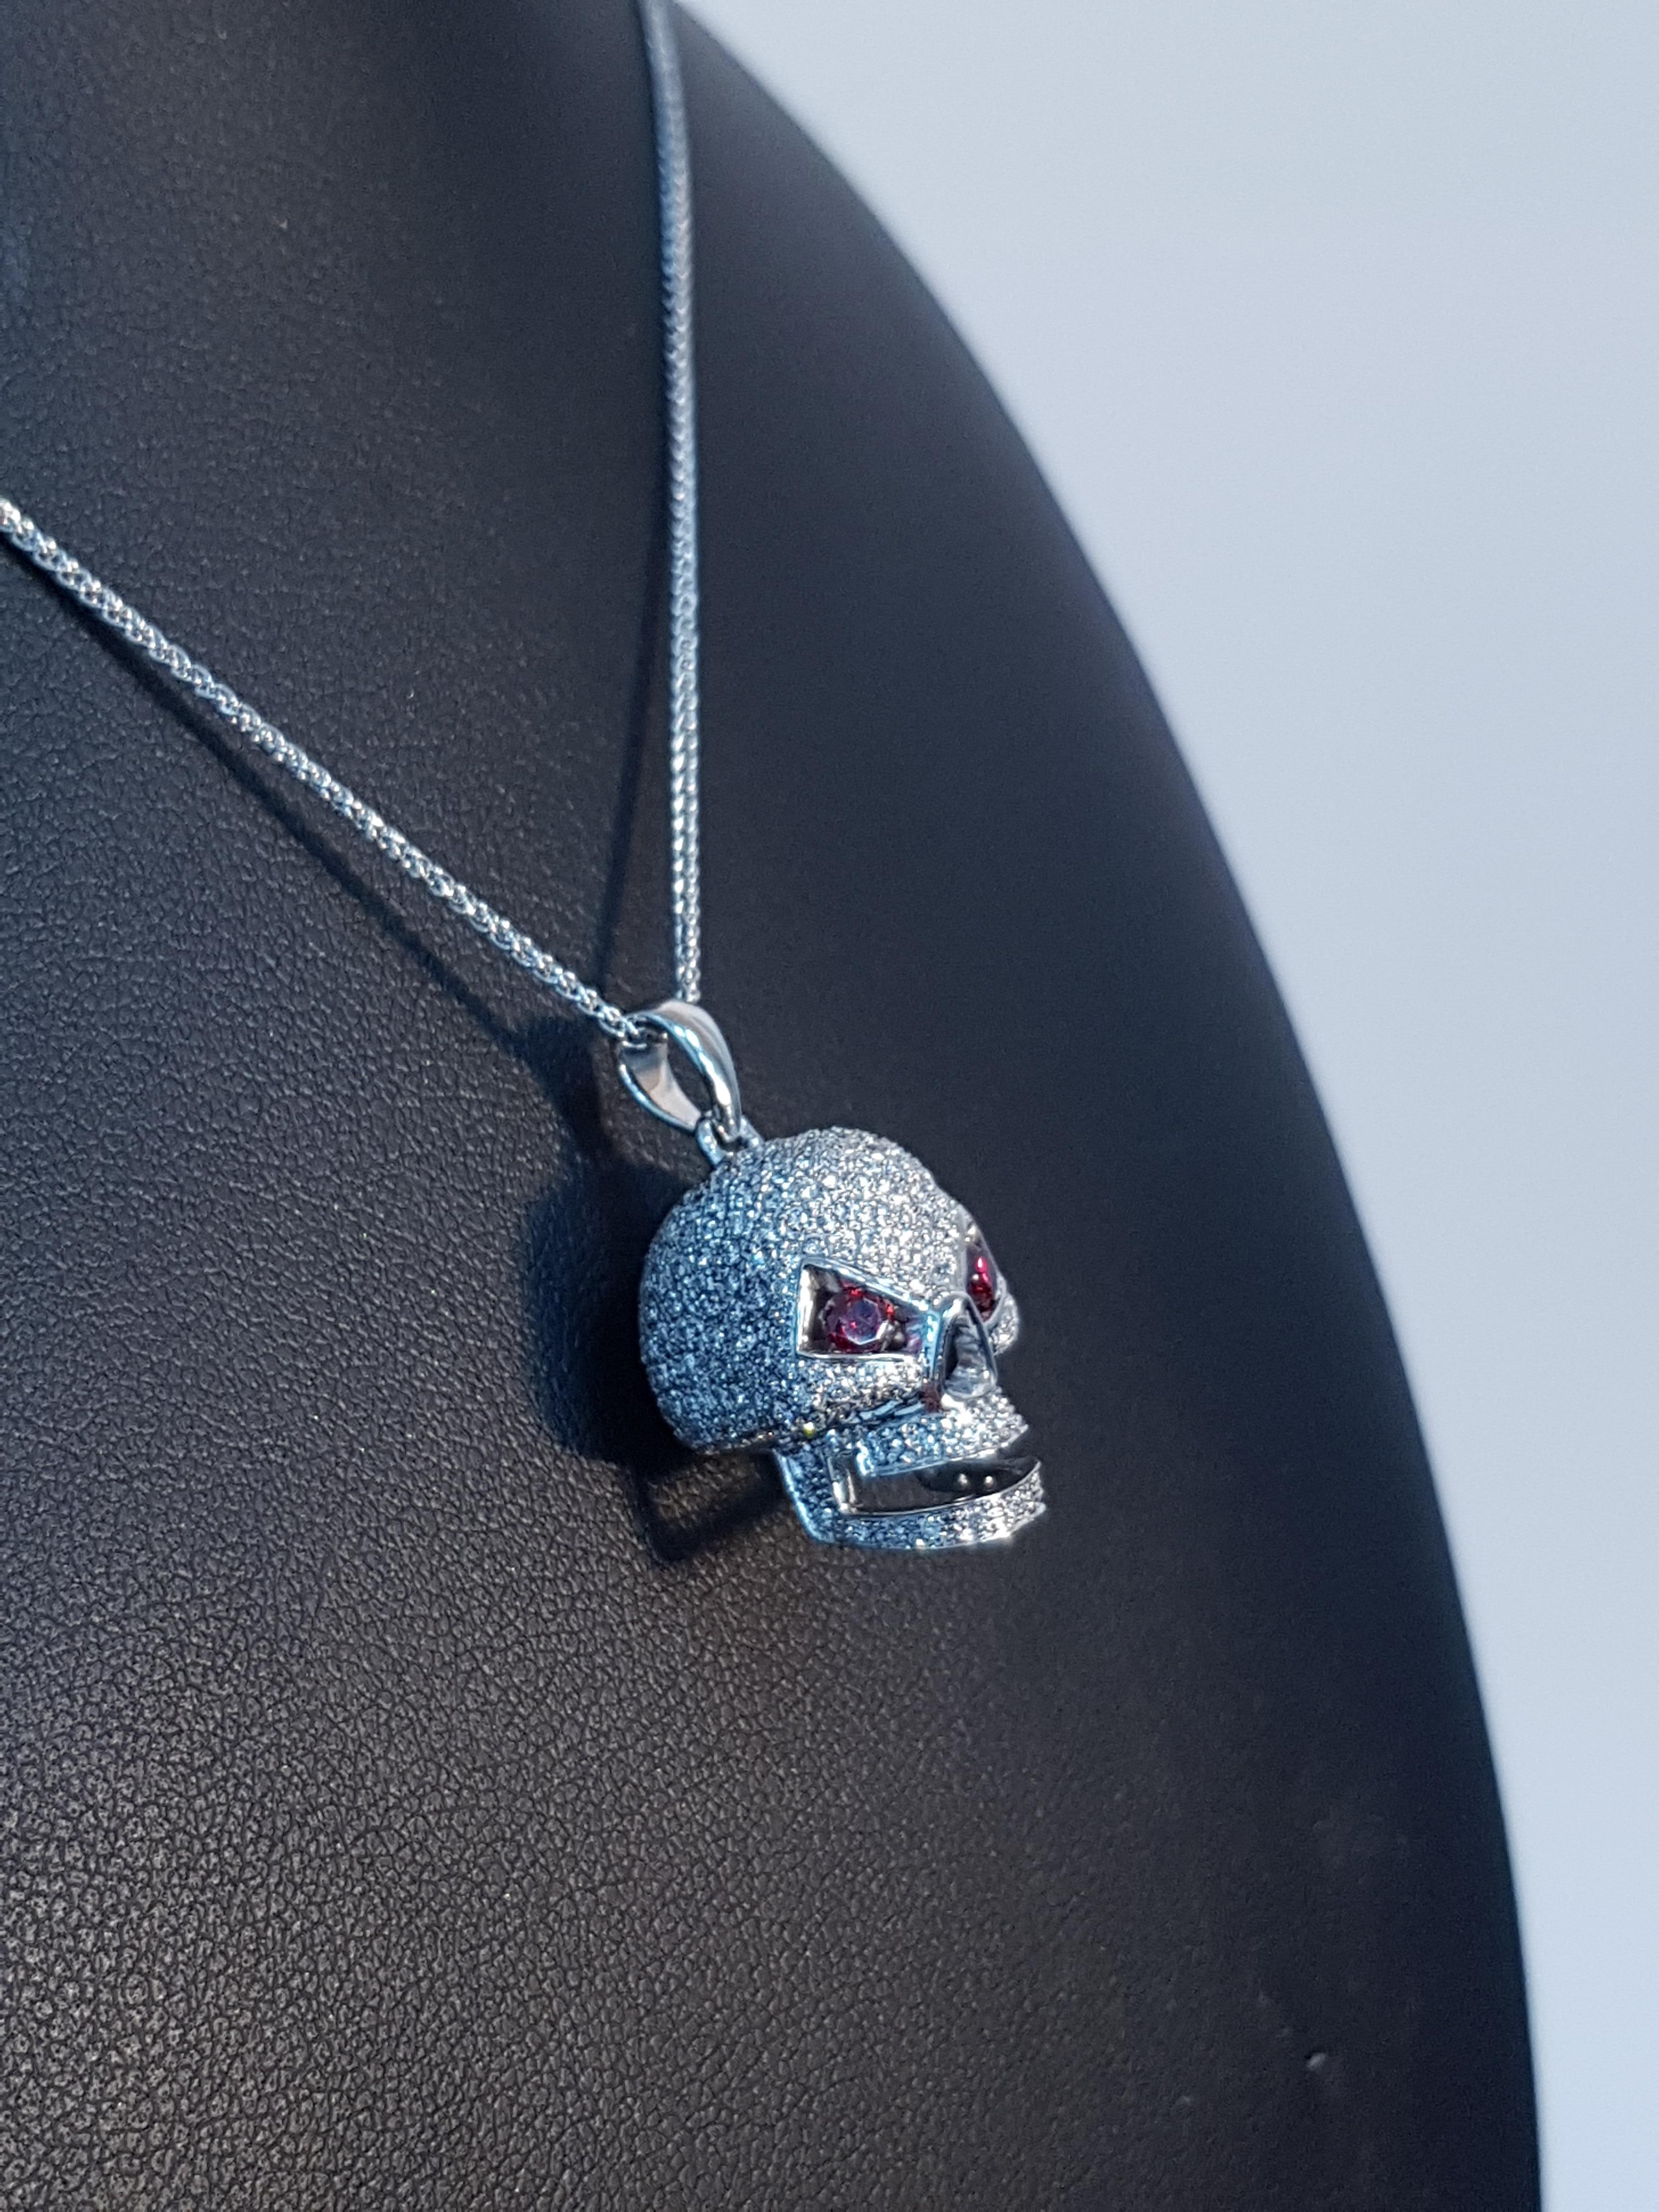 Skull 2.00 Carat Bespoke Diamond Red Ruby 18 Karat White Gold Pendant Necklace In New Condition For Sale In London, GB